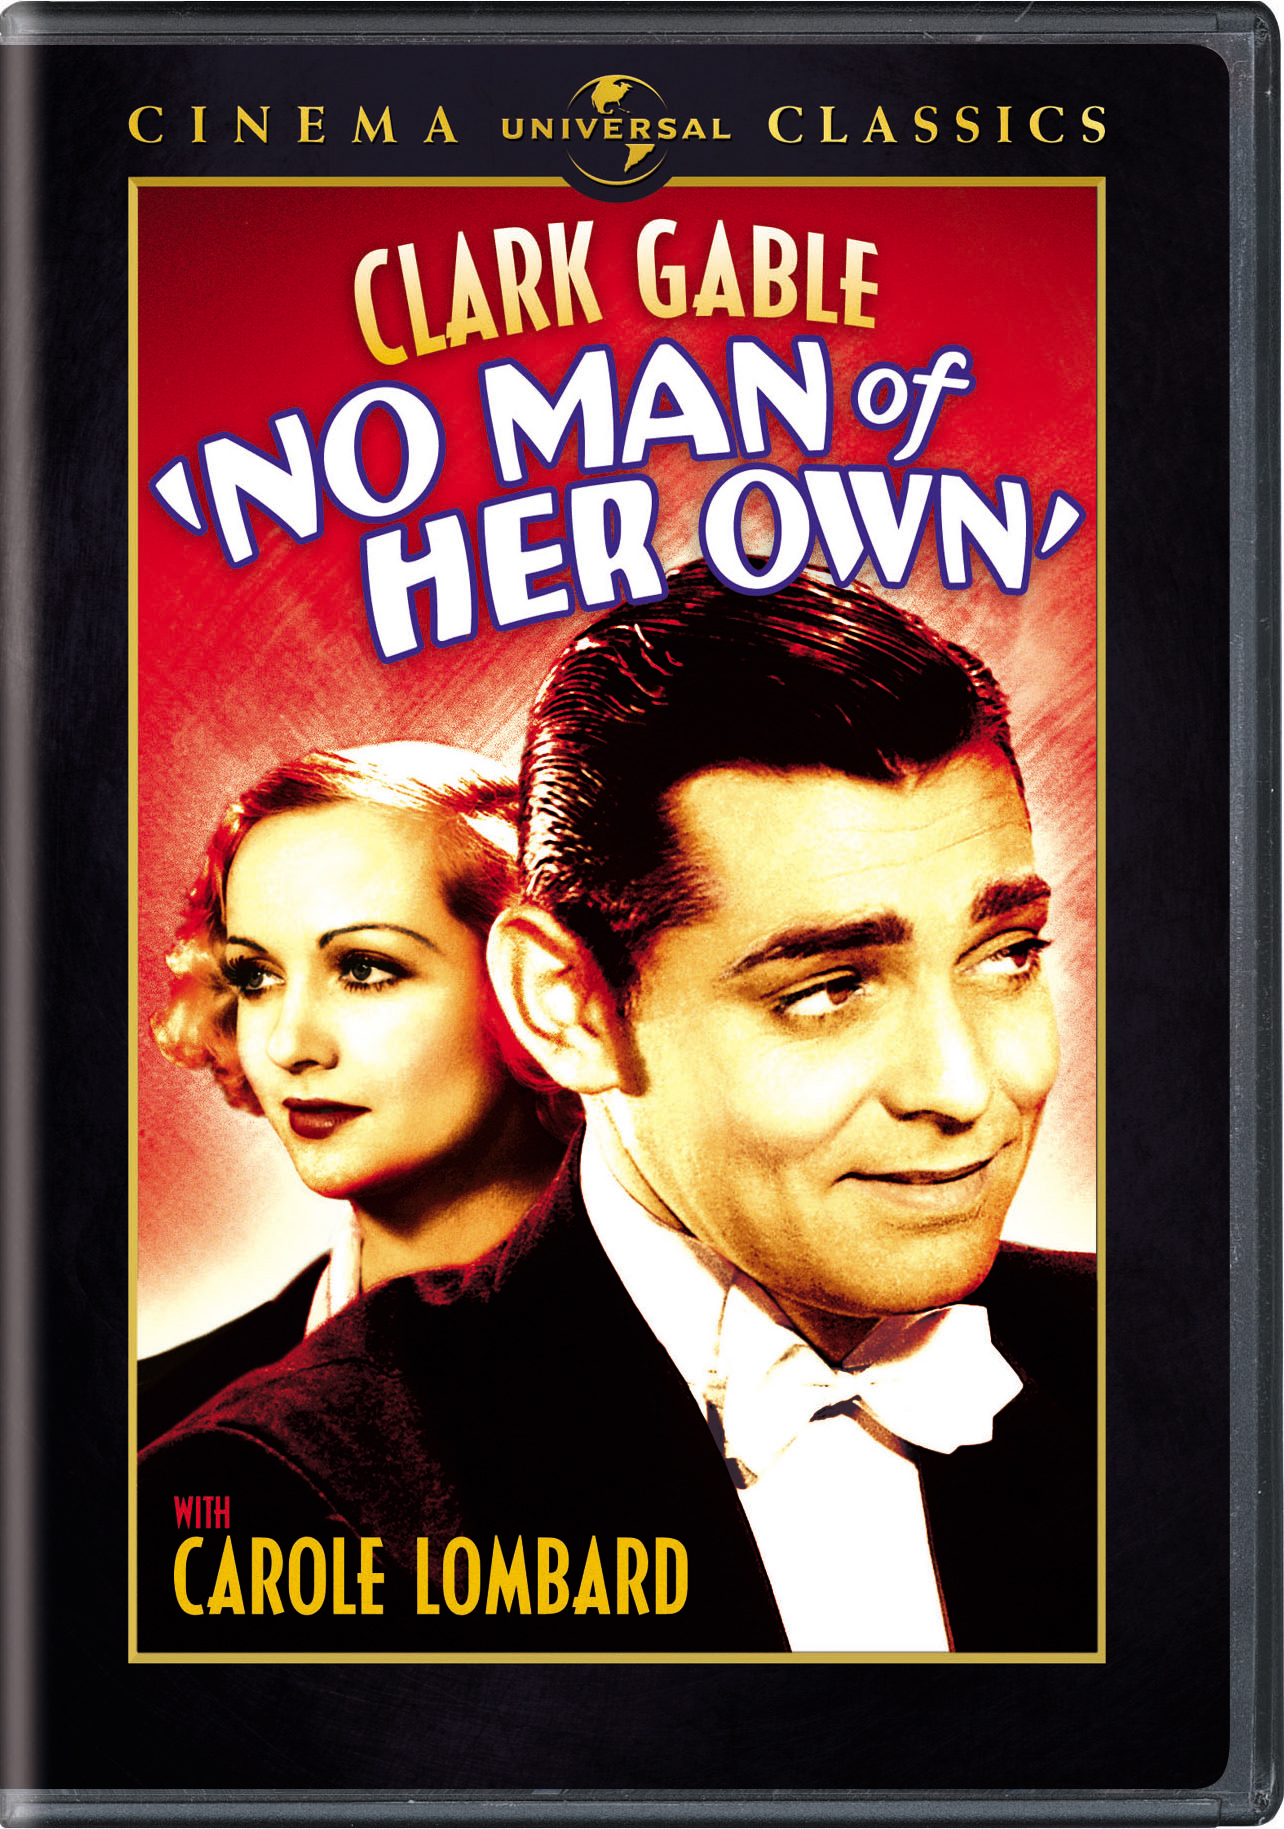 No Man Of Her Own - DVD [ 1932 ]  - Drama Movies On DVD - Movies On GRUV